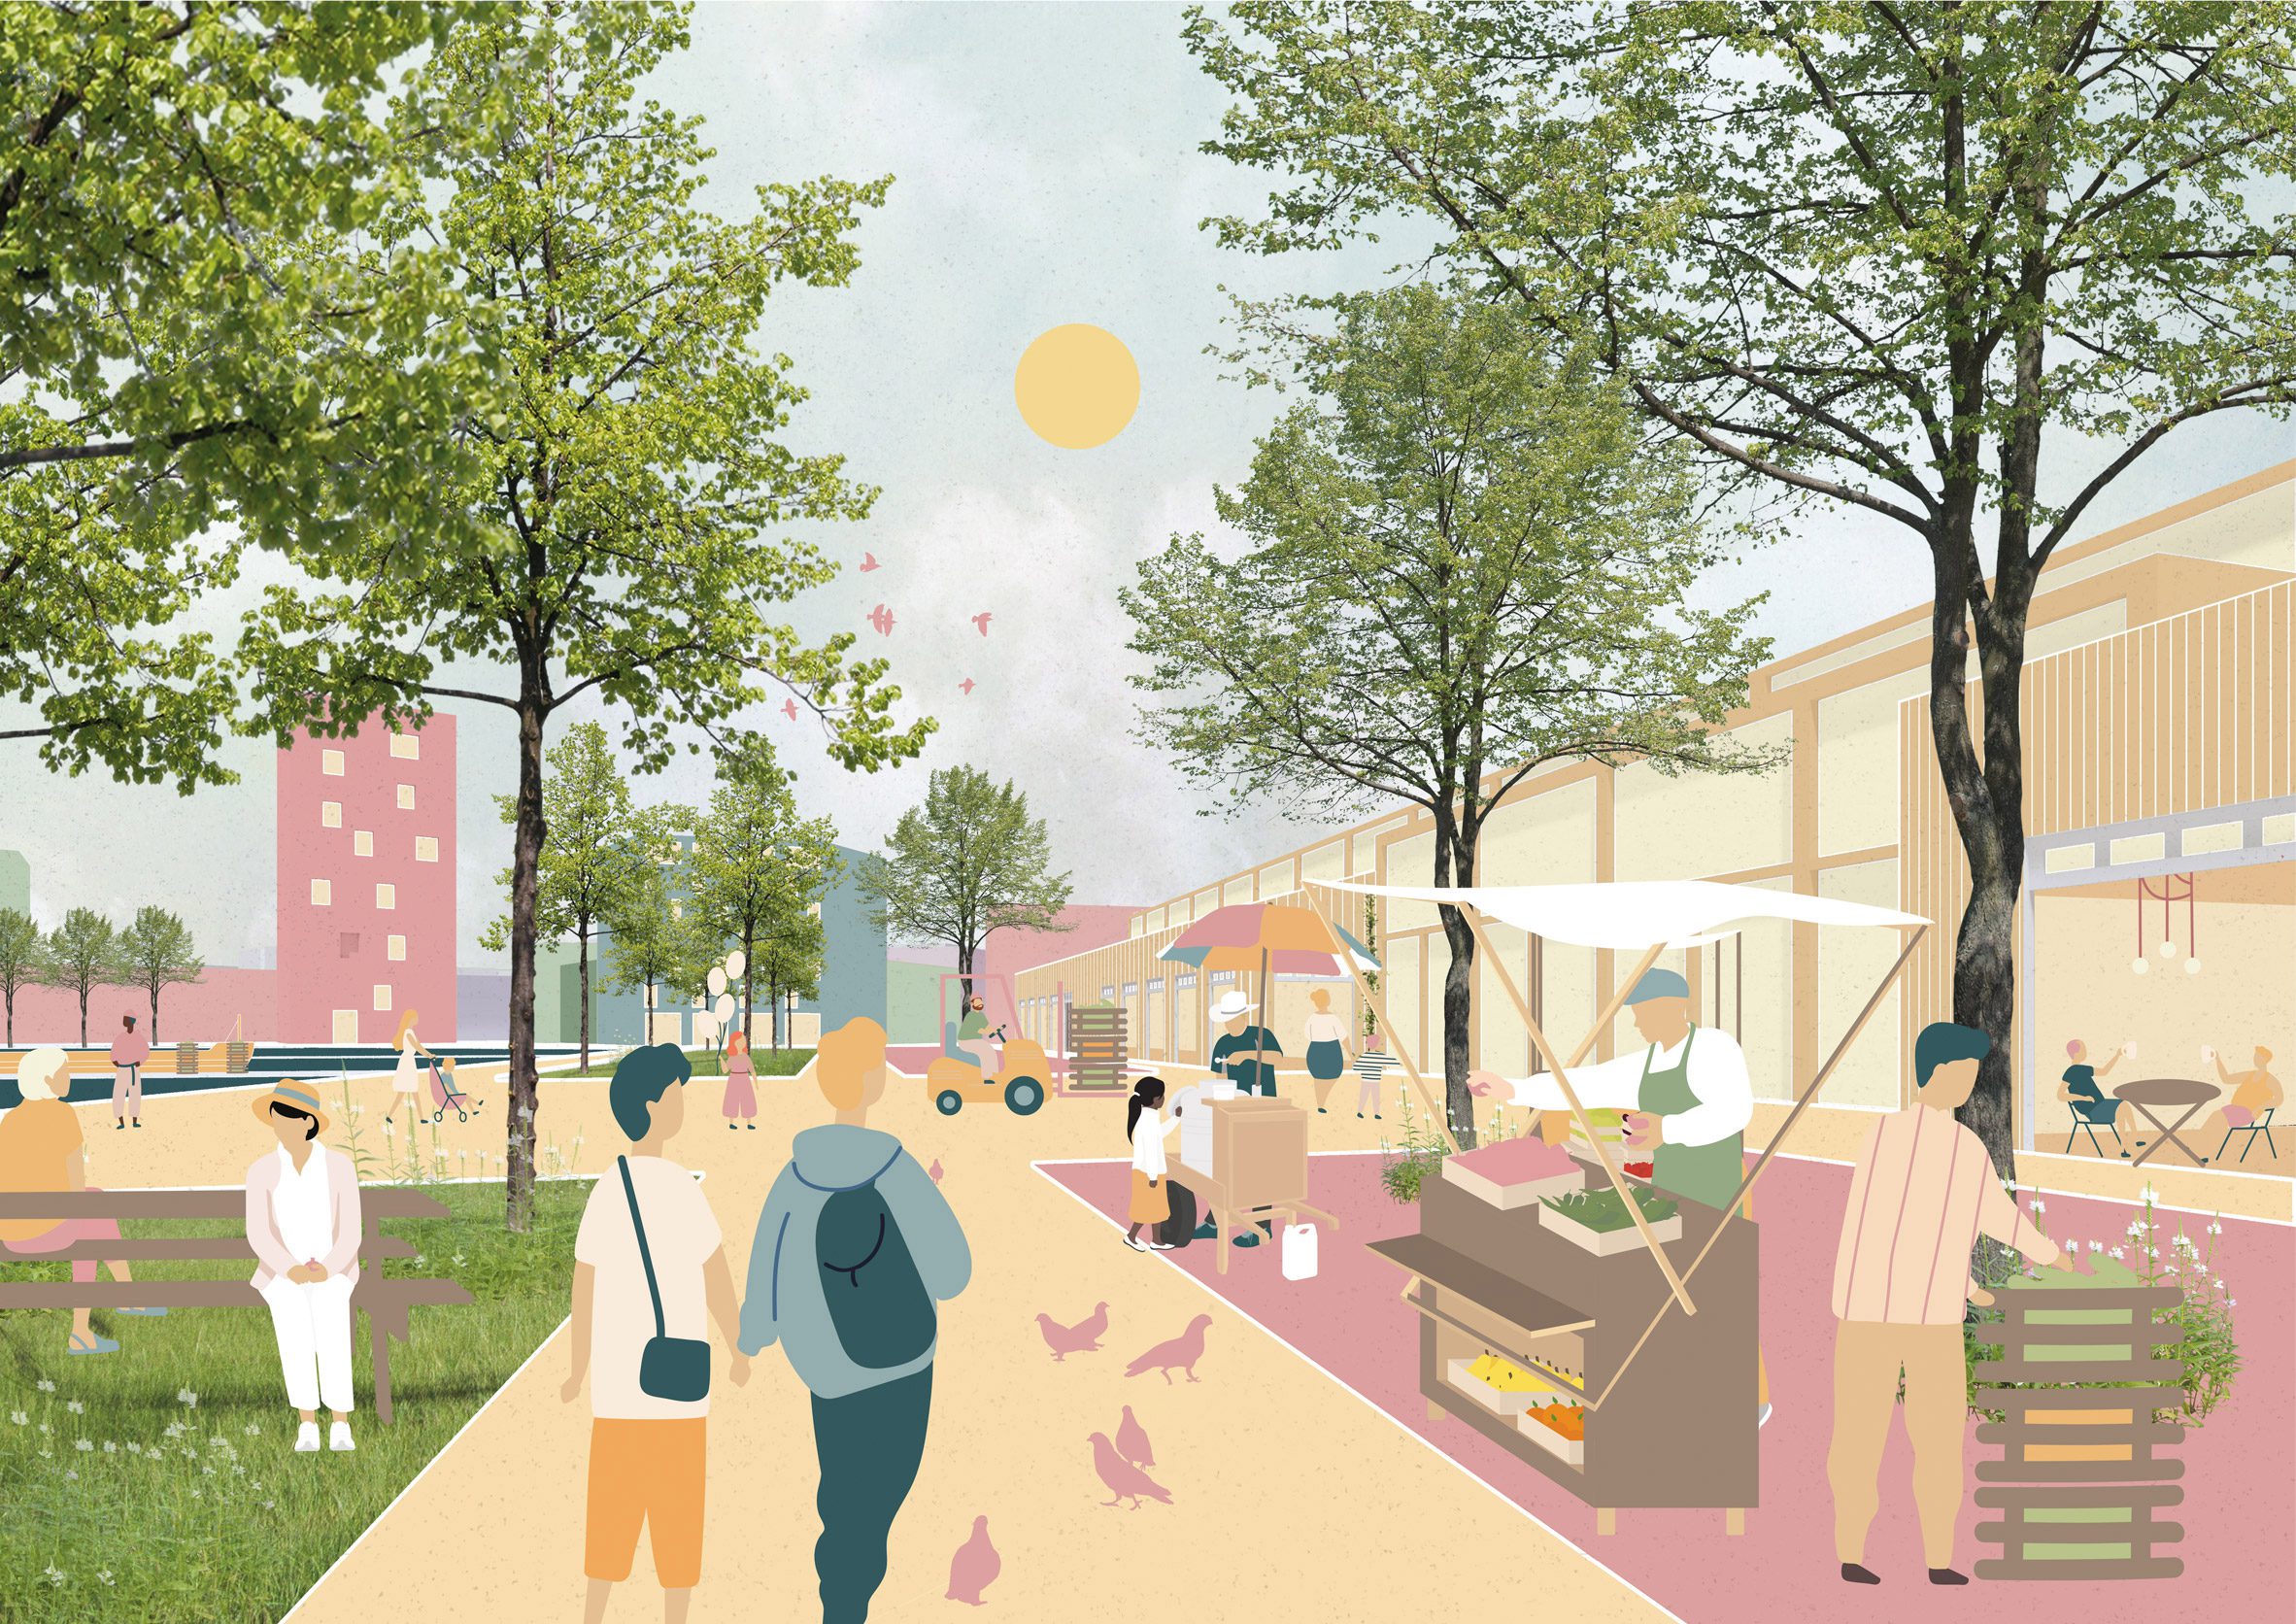 illustration of a lively city scene, a market next to a park by a student at amsterdam university of the arts